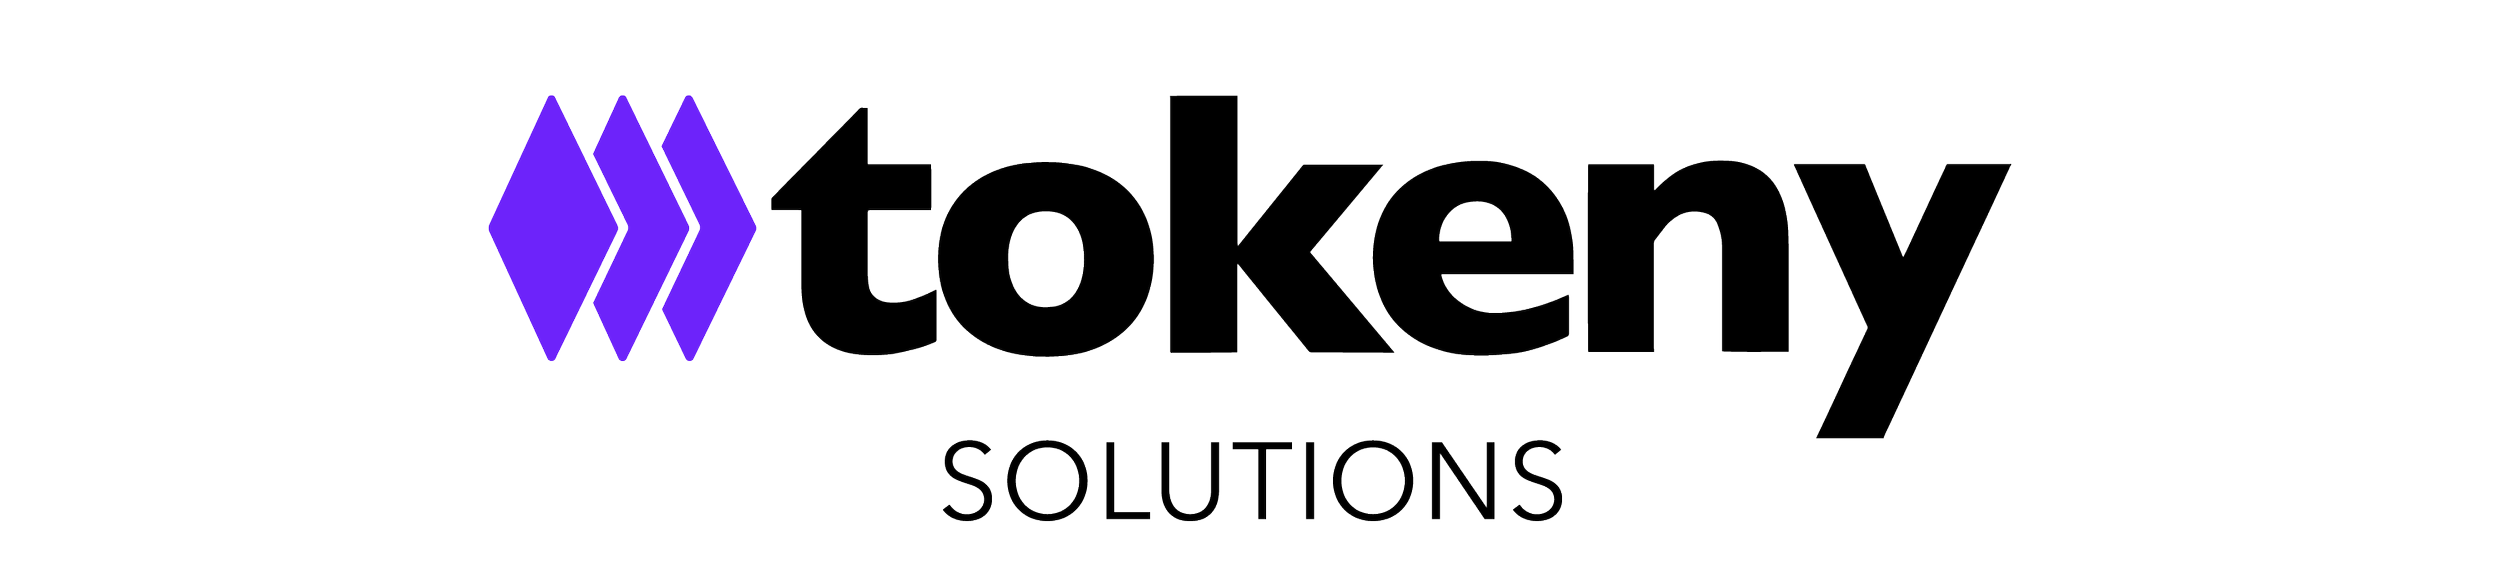 Tokeny Solutions Logo Default.png